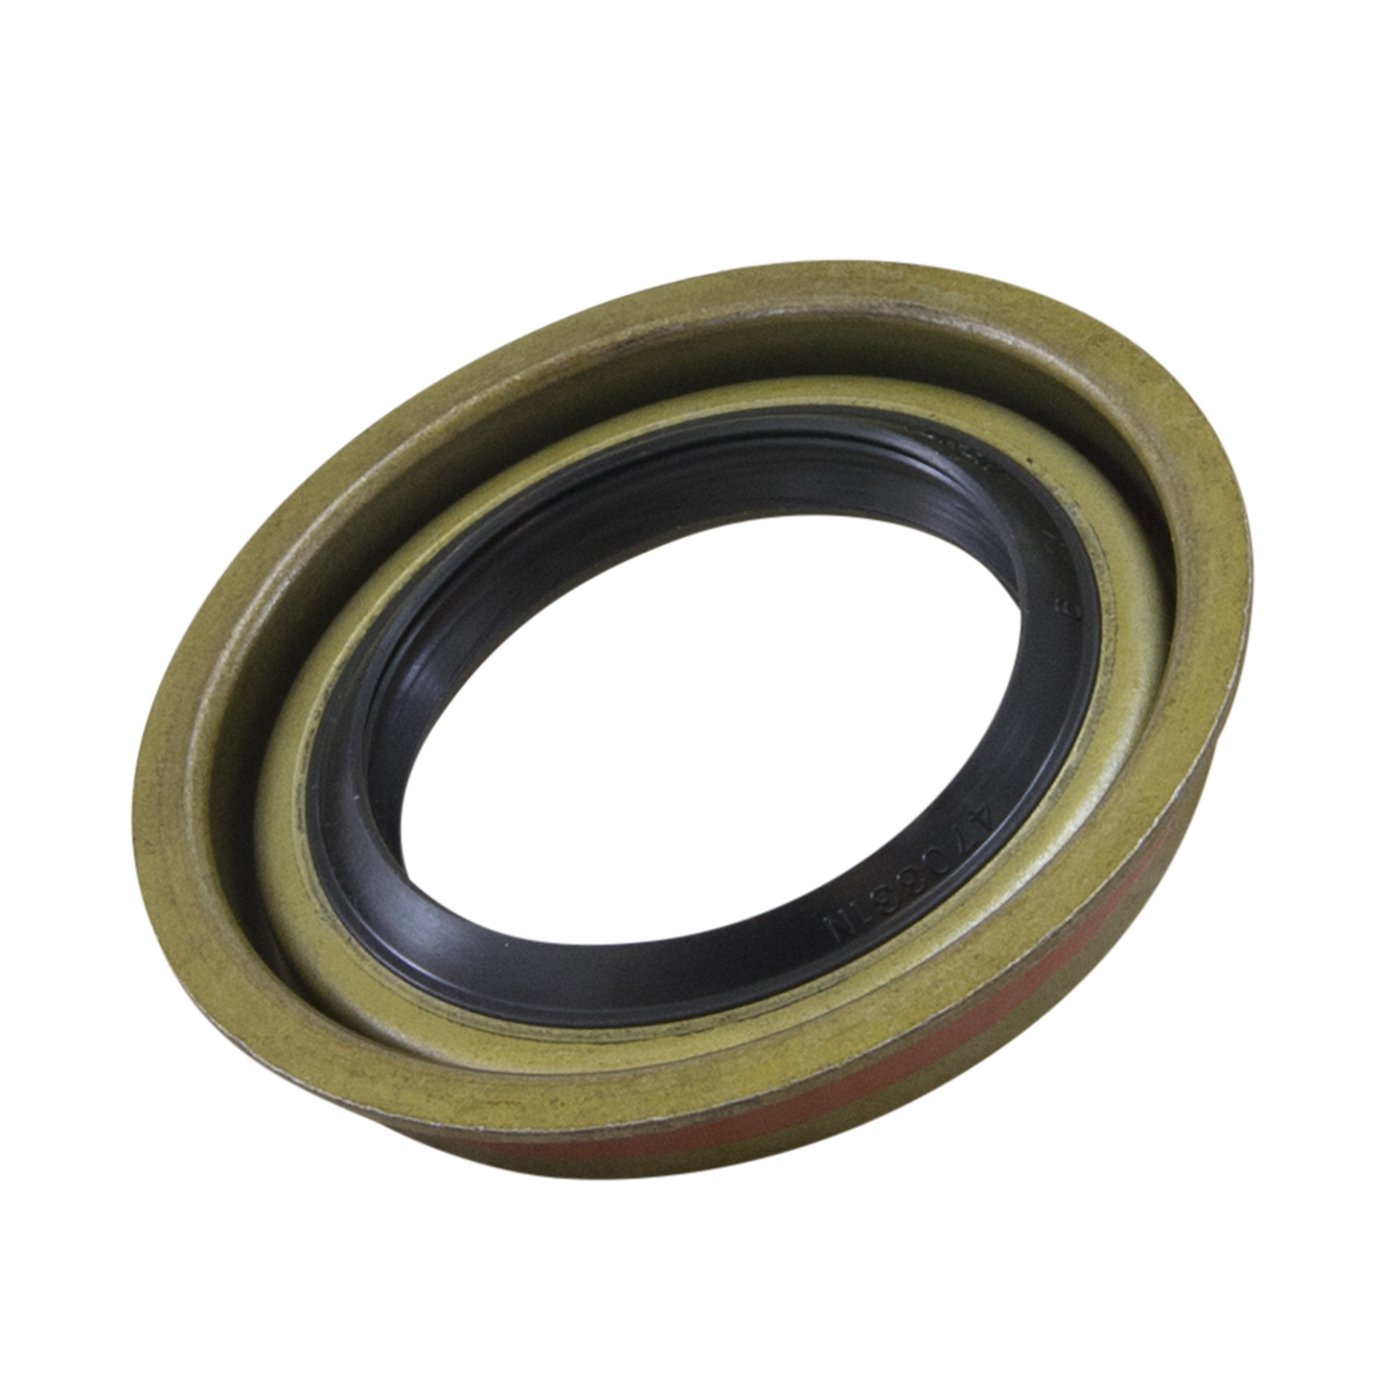 Pinion seal for Model 20 and Model 35 